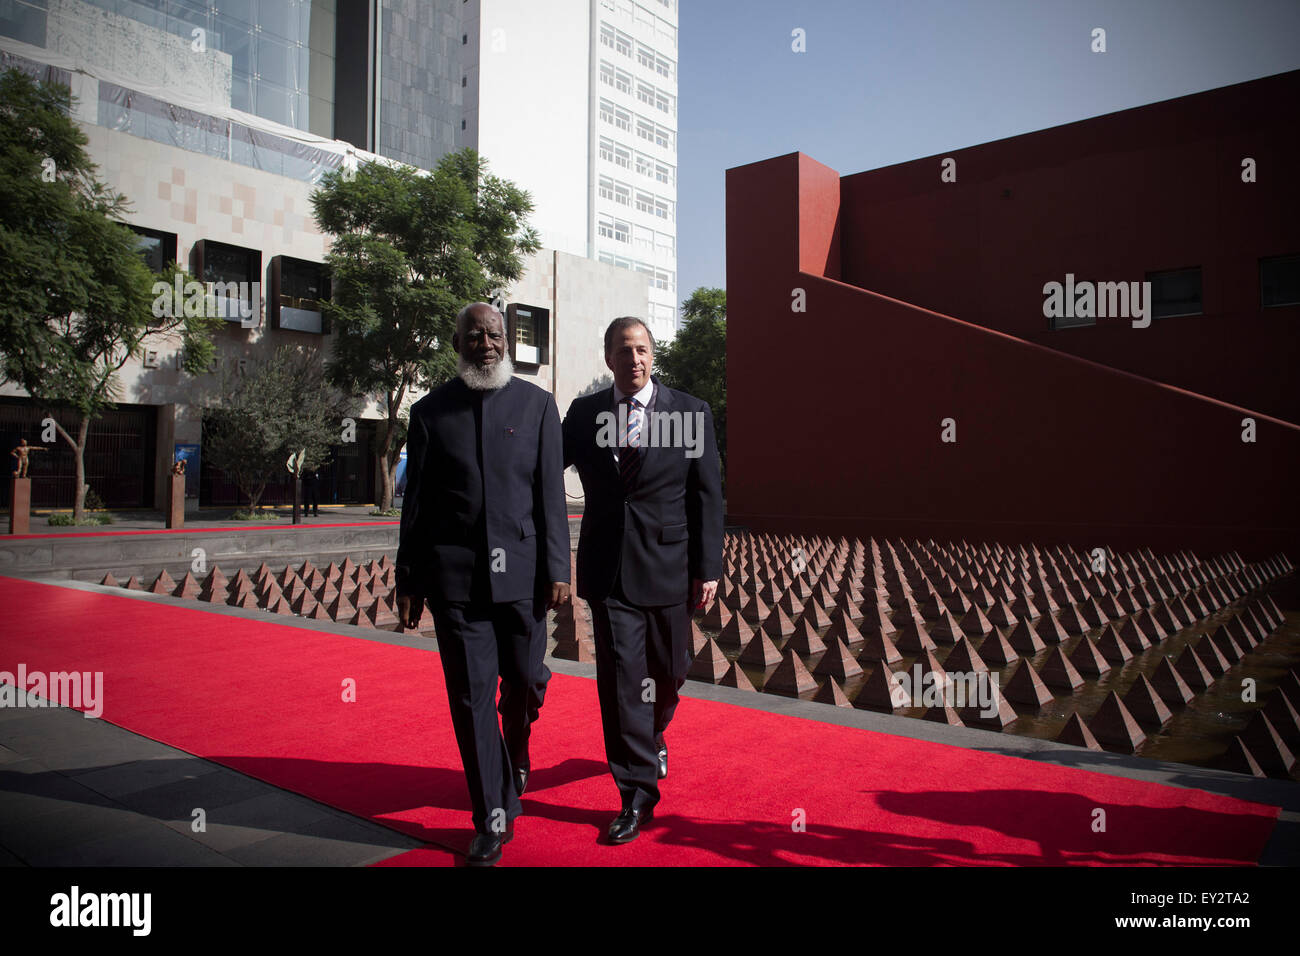 Mexico City, Mexico. 20th July, 2015. Mexico's Foreign Minister Jose Antonio Meade (R) meets with his Belize's counterpart Wilfred Peter Elrington, in Mexico City, capital of Mexico, on July 20, 2015. © Alejandro Ayala/Xinhua/Alamy Live News Stock Photo